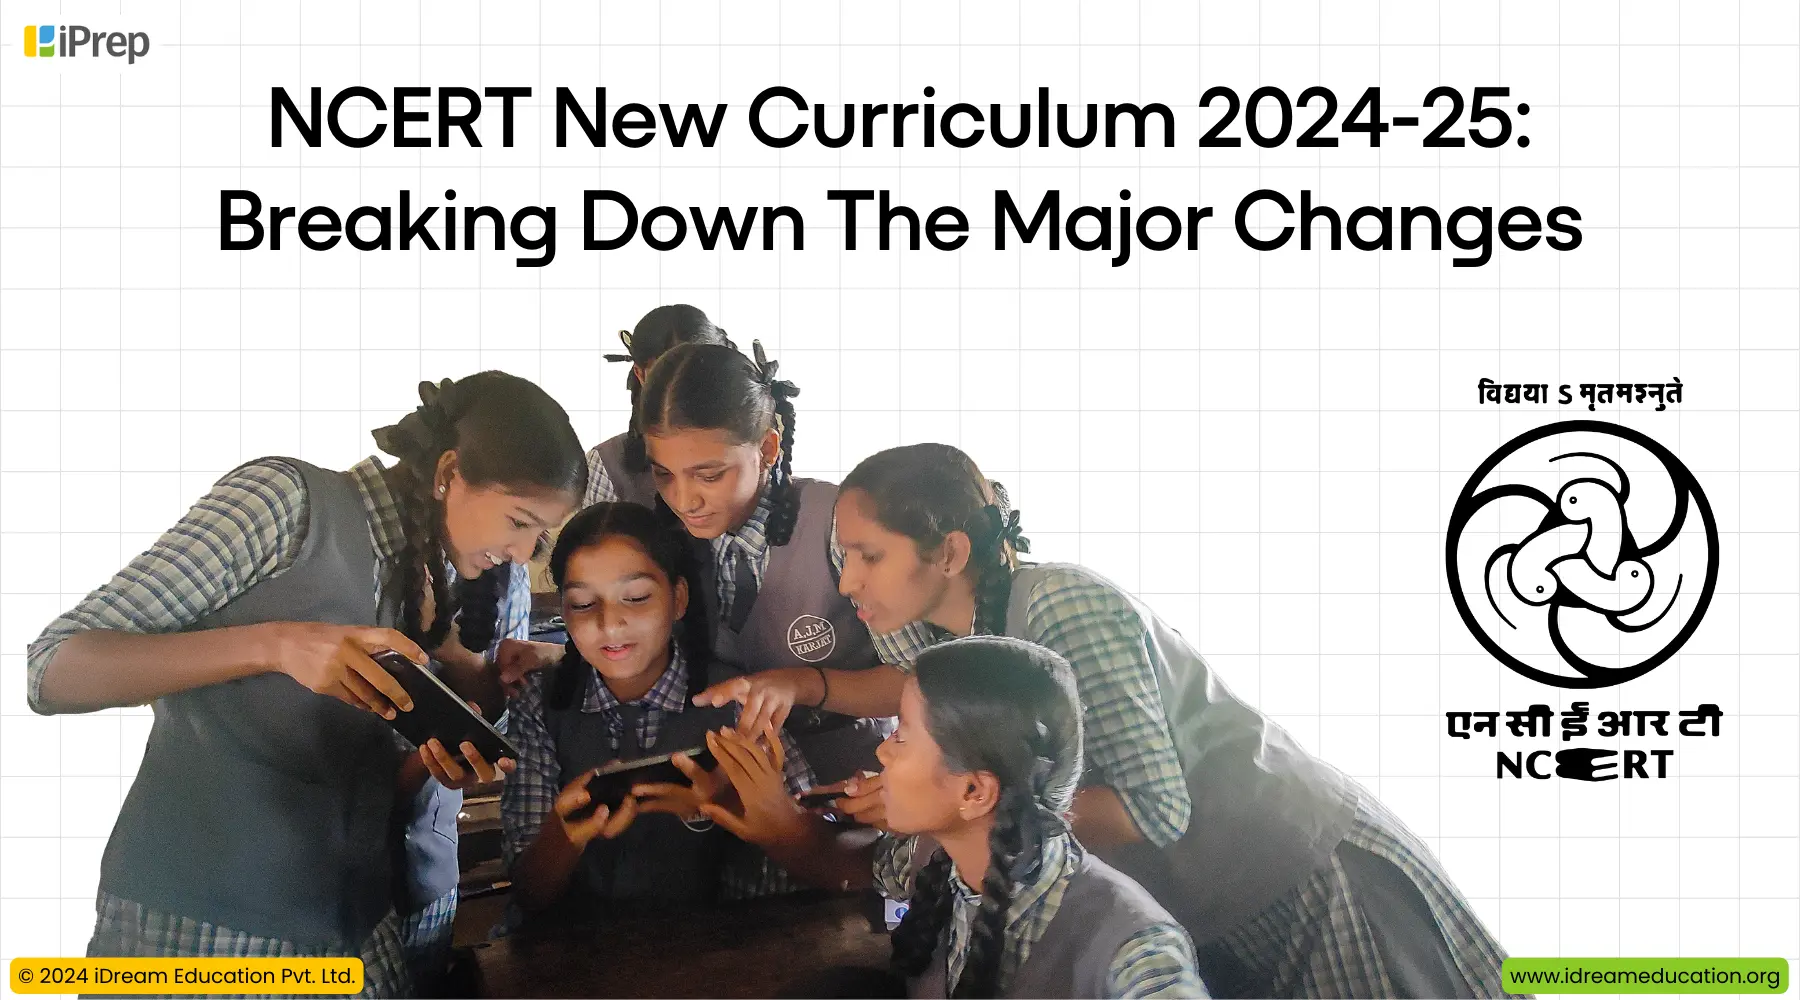 A visual representing NCERT new curriculum 2024-25 covering a breakdown of all major changes